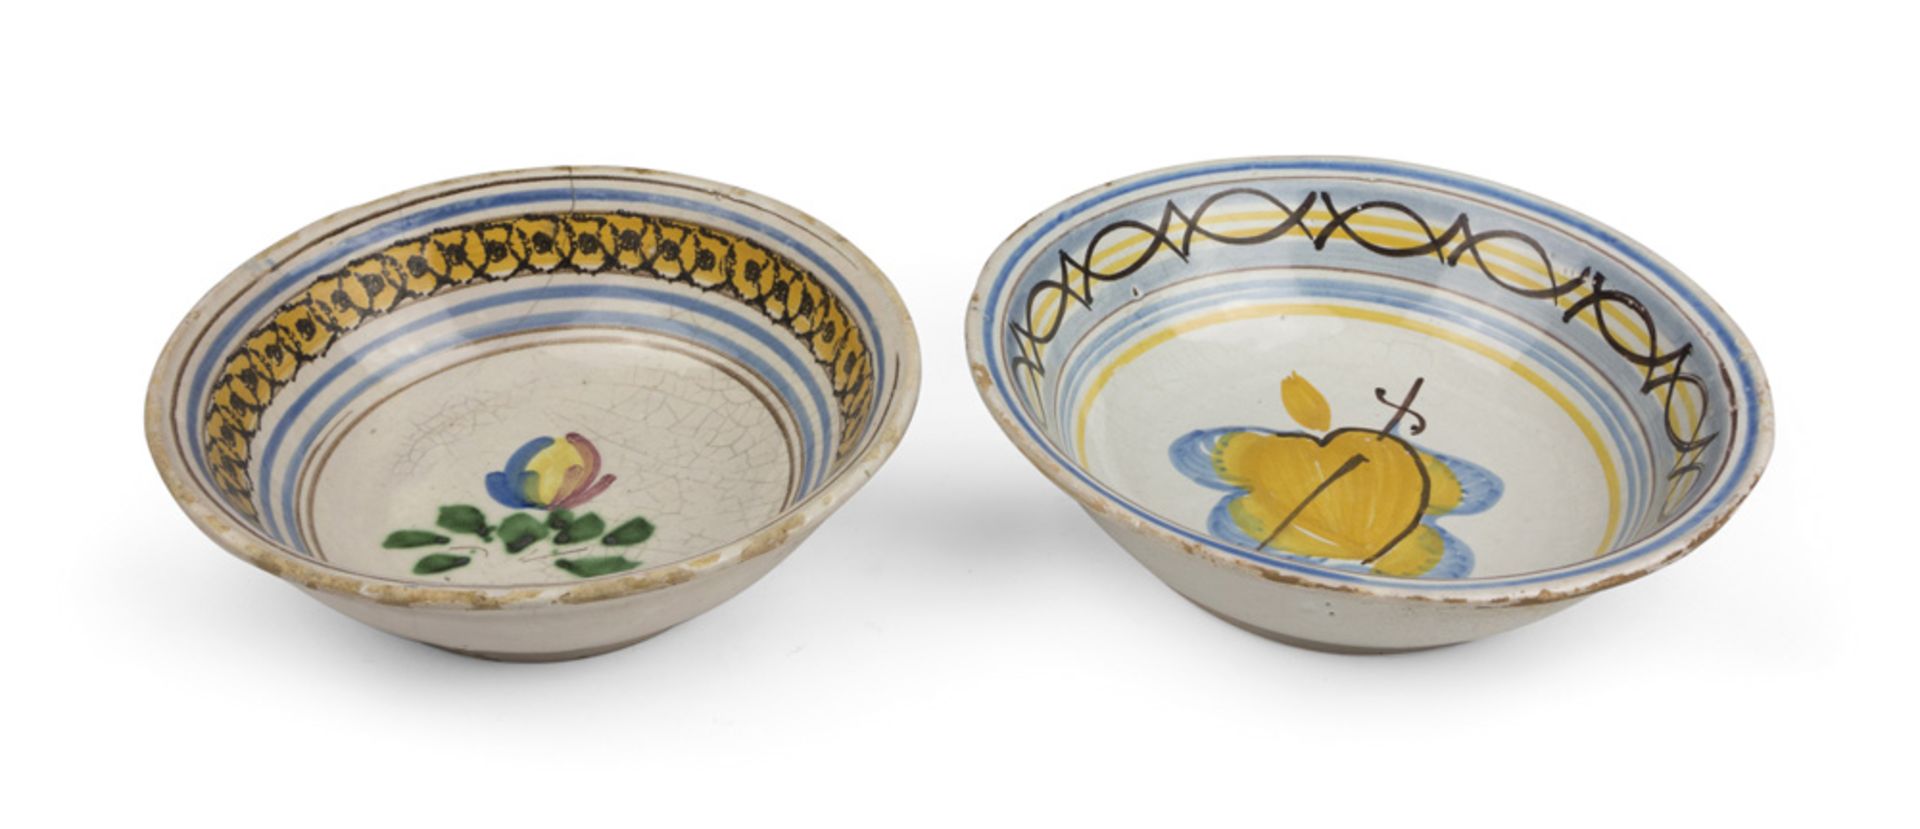 TWO SALAD BOWLS IN CERAMICS, CAMPANIAN WORKSHOP LATE 19TH CENTURY decorated with flowers, fruits and